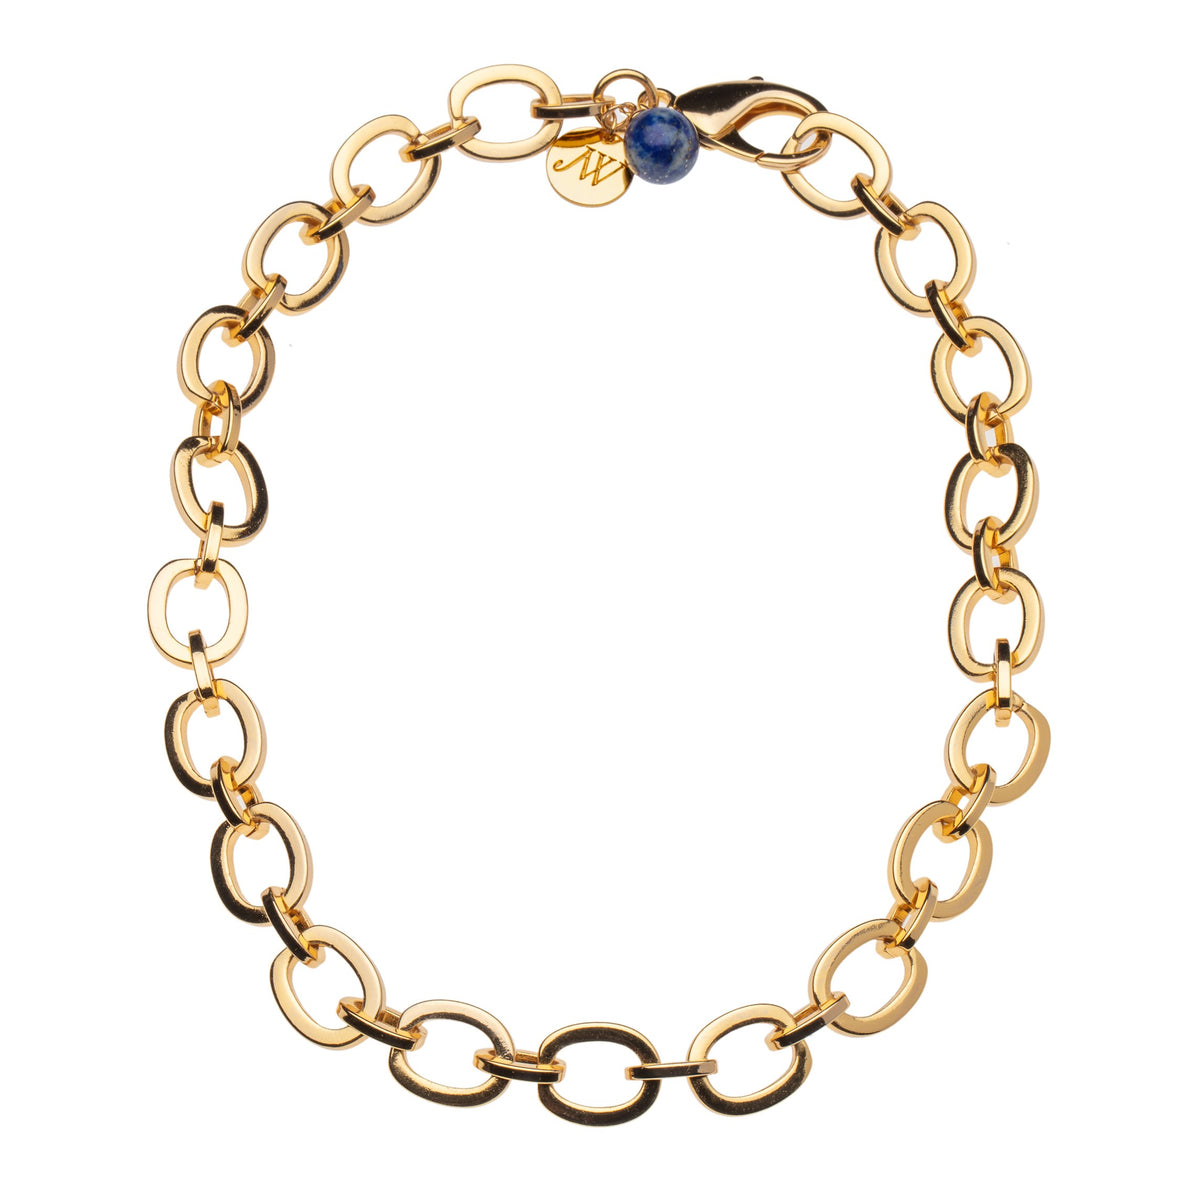 Chunky Link Chain with Lapis Bead | 18 Inches | Jane Win